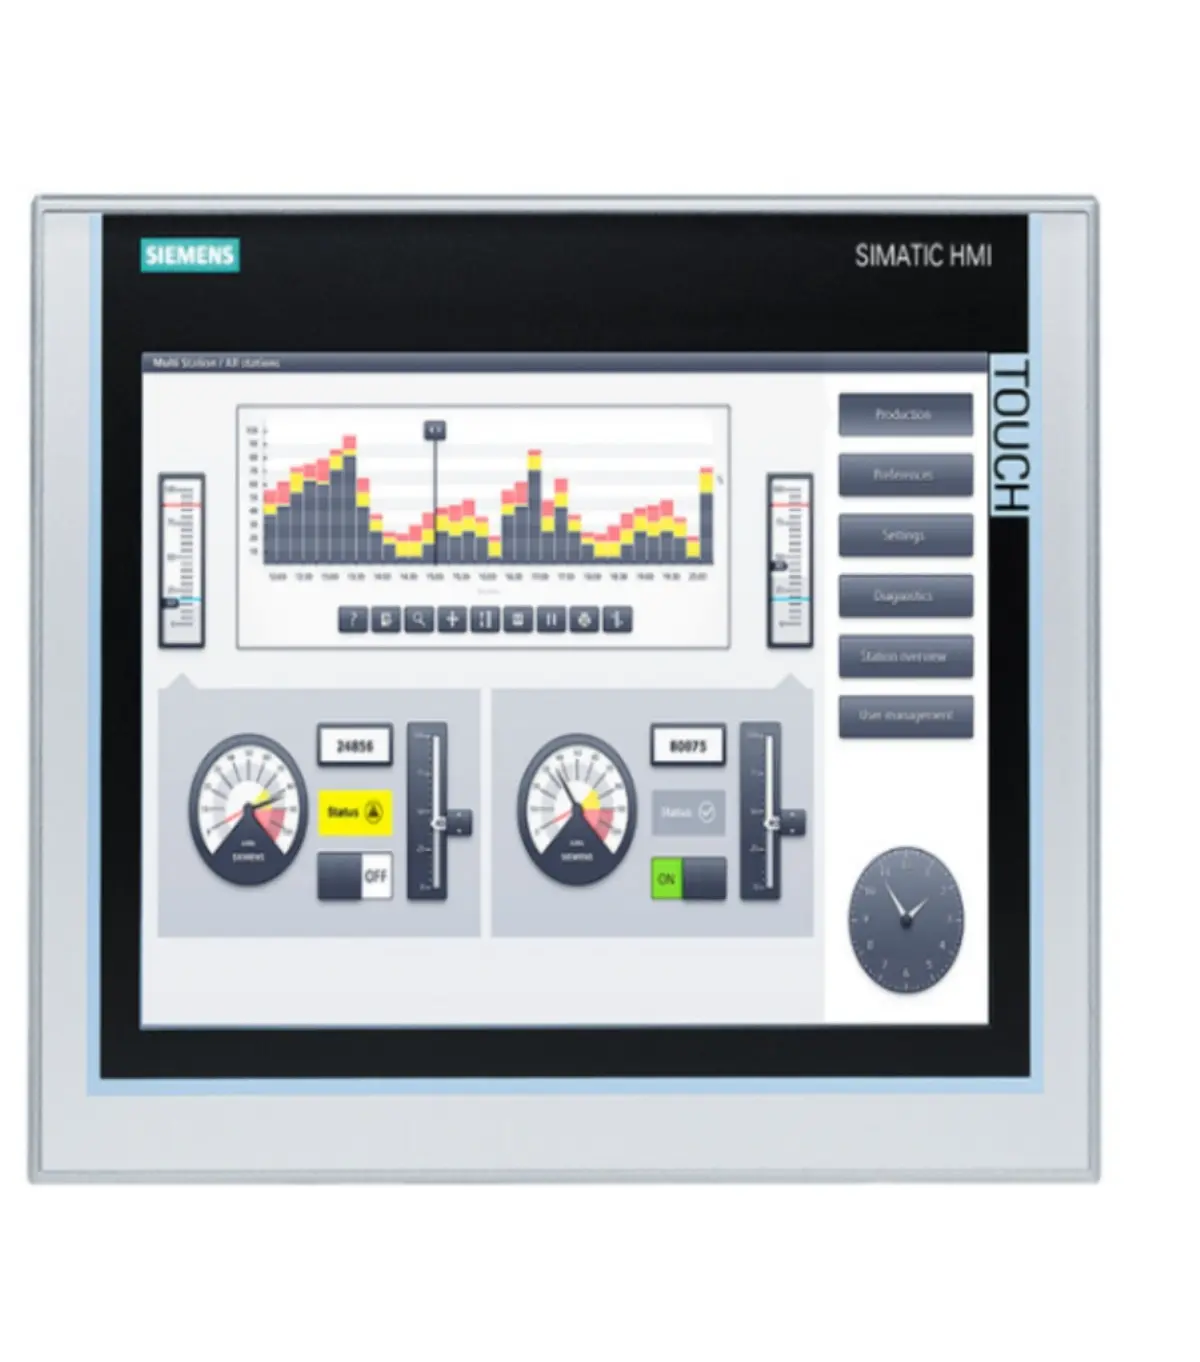 KTP1200 New generation compact panel button+touch operation 12 inch 65,000 color display 6AV21232MB030AX0SIMATIC HMI PANEL